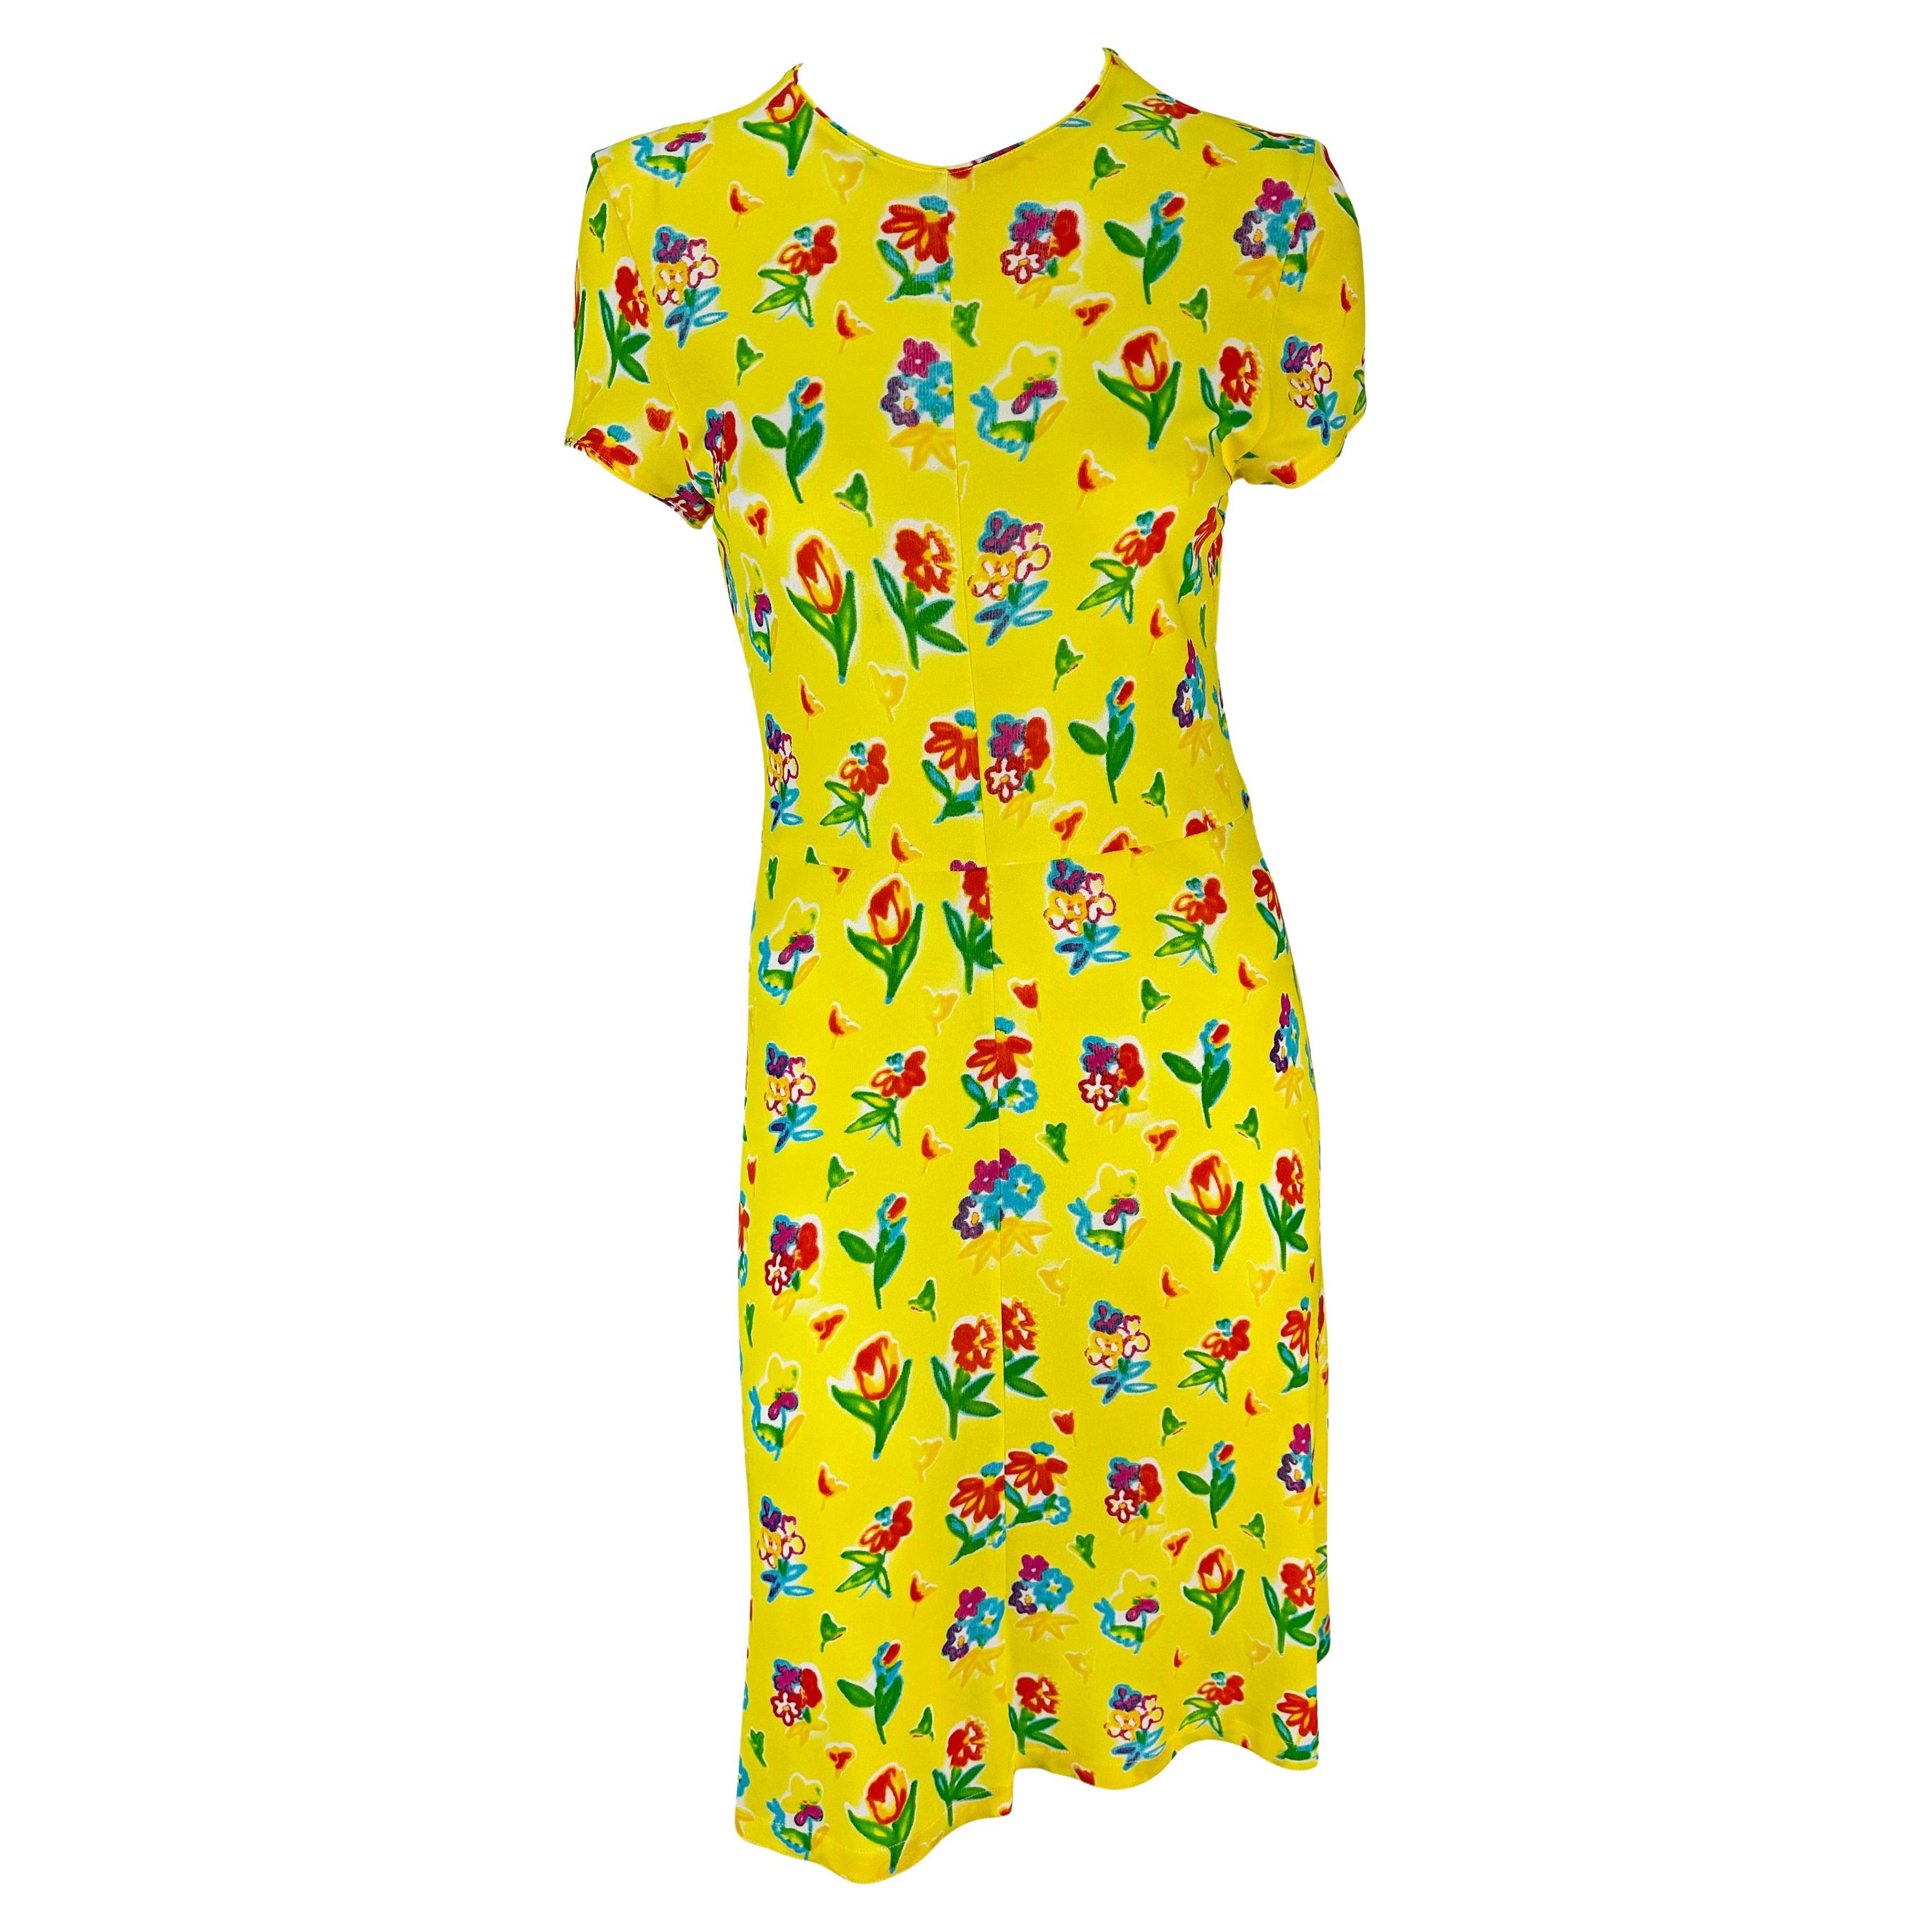 S/S 1996 Gianni Versace Yellow Floral Short Sleeve Viscose Midi Dress For Sale